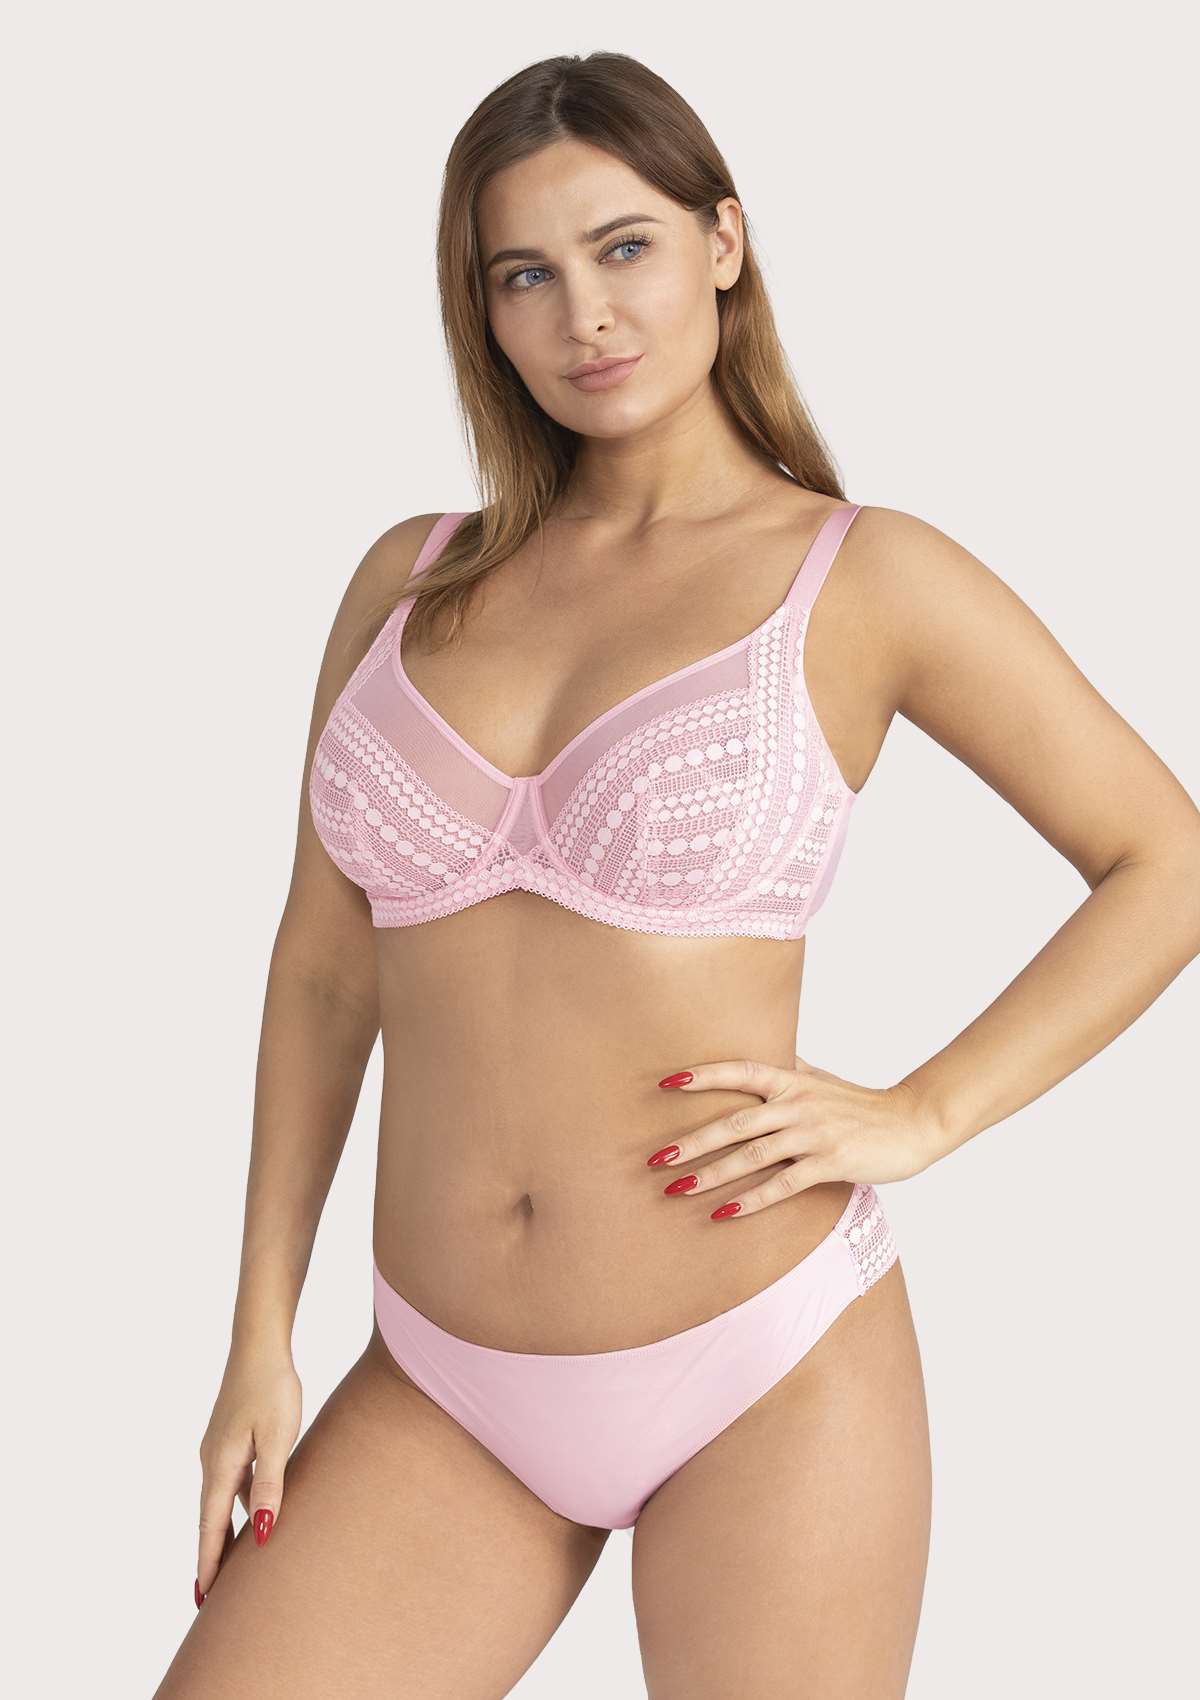 HSIA Heroine Lace Bra And Panties Set: Most Comfortable Supportive Bra - Pink / 42 / C